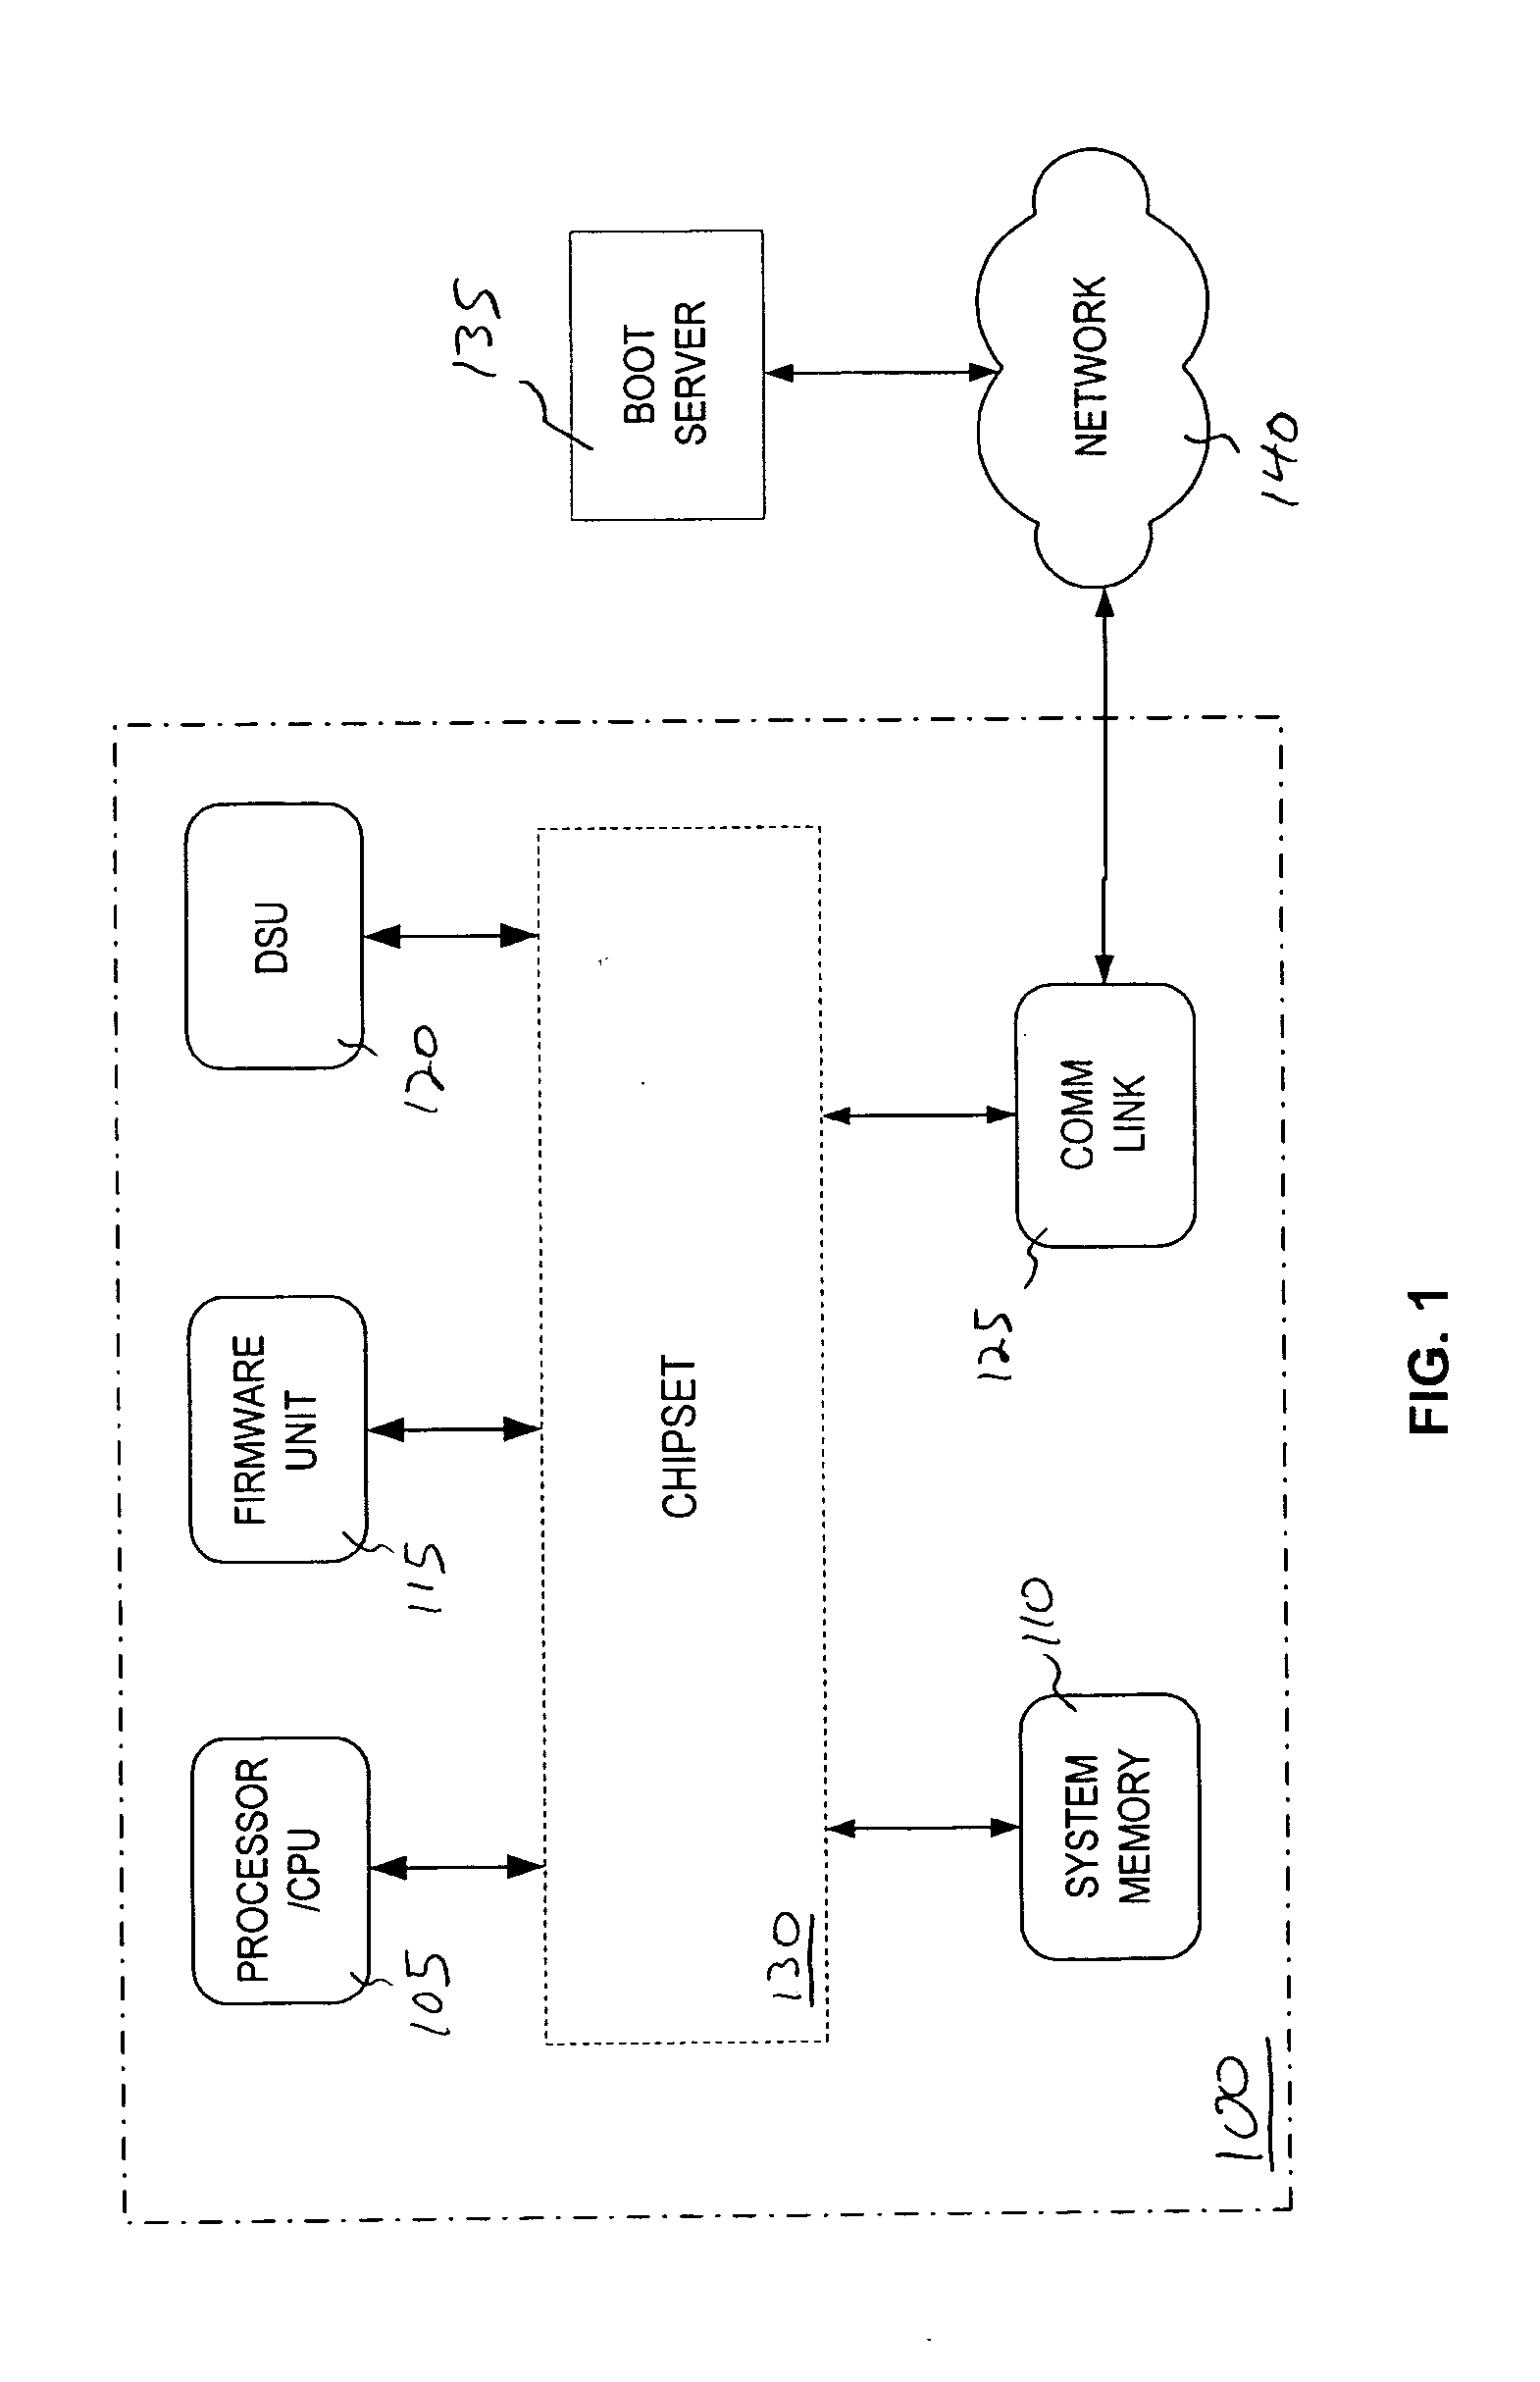 Firmware interfacing with network protocol offload engines to provide fast network booting, system repurposing, system provisioning, system manageability,and disaster recovery